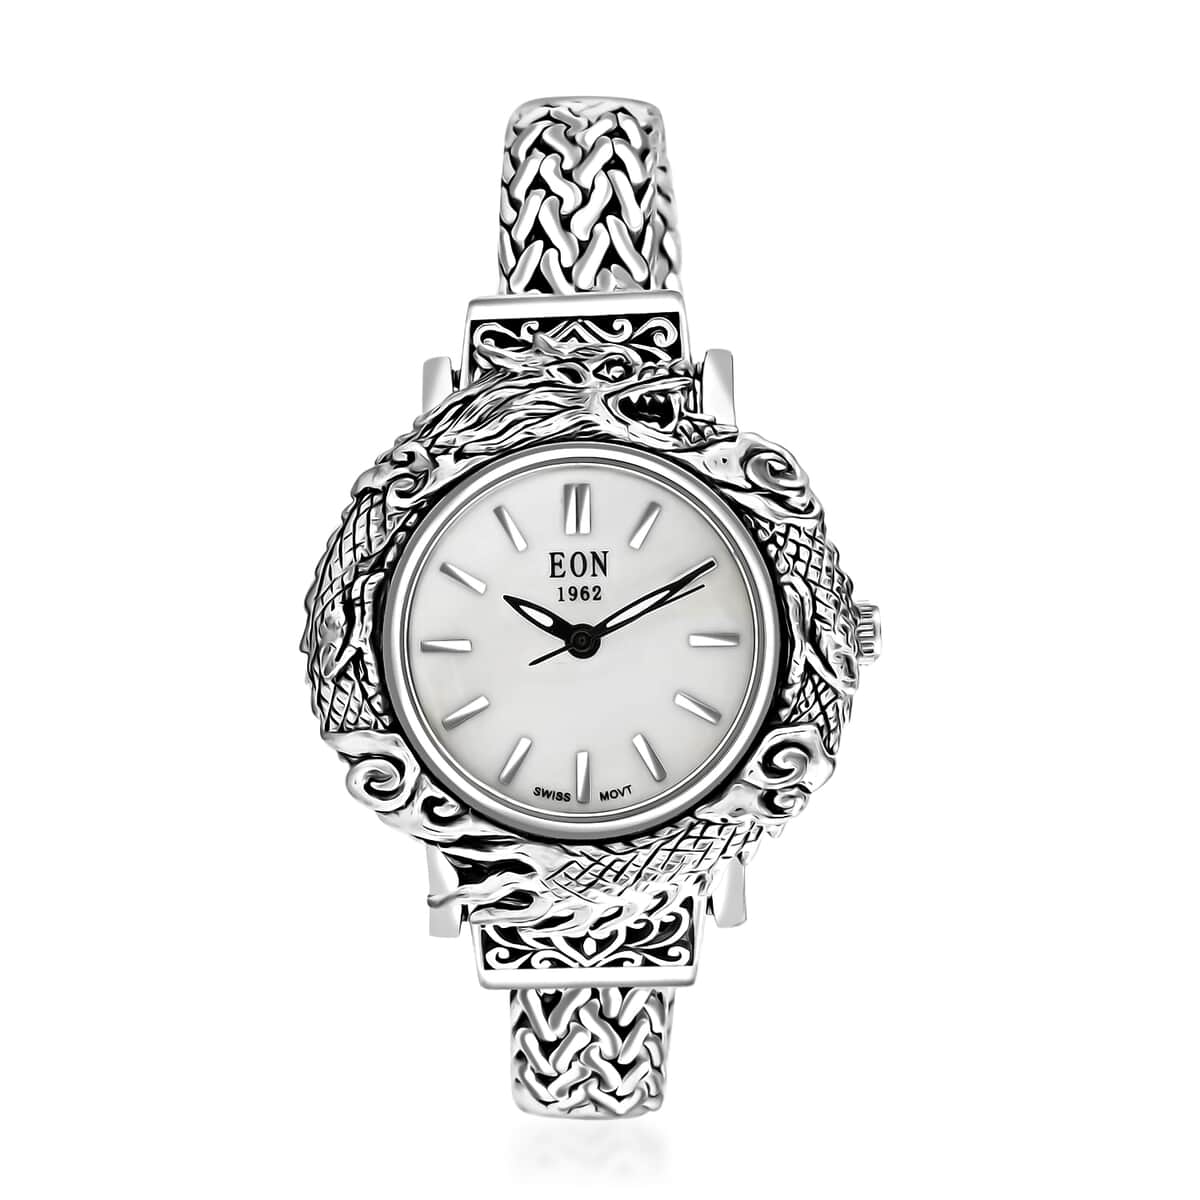 BALI LEGACY EON 1962 Swiss Movement MOP Dial Dragon Case Bracelet Watch in Sterling Silver (6.50 in) (50 g) image number 0